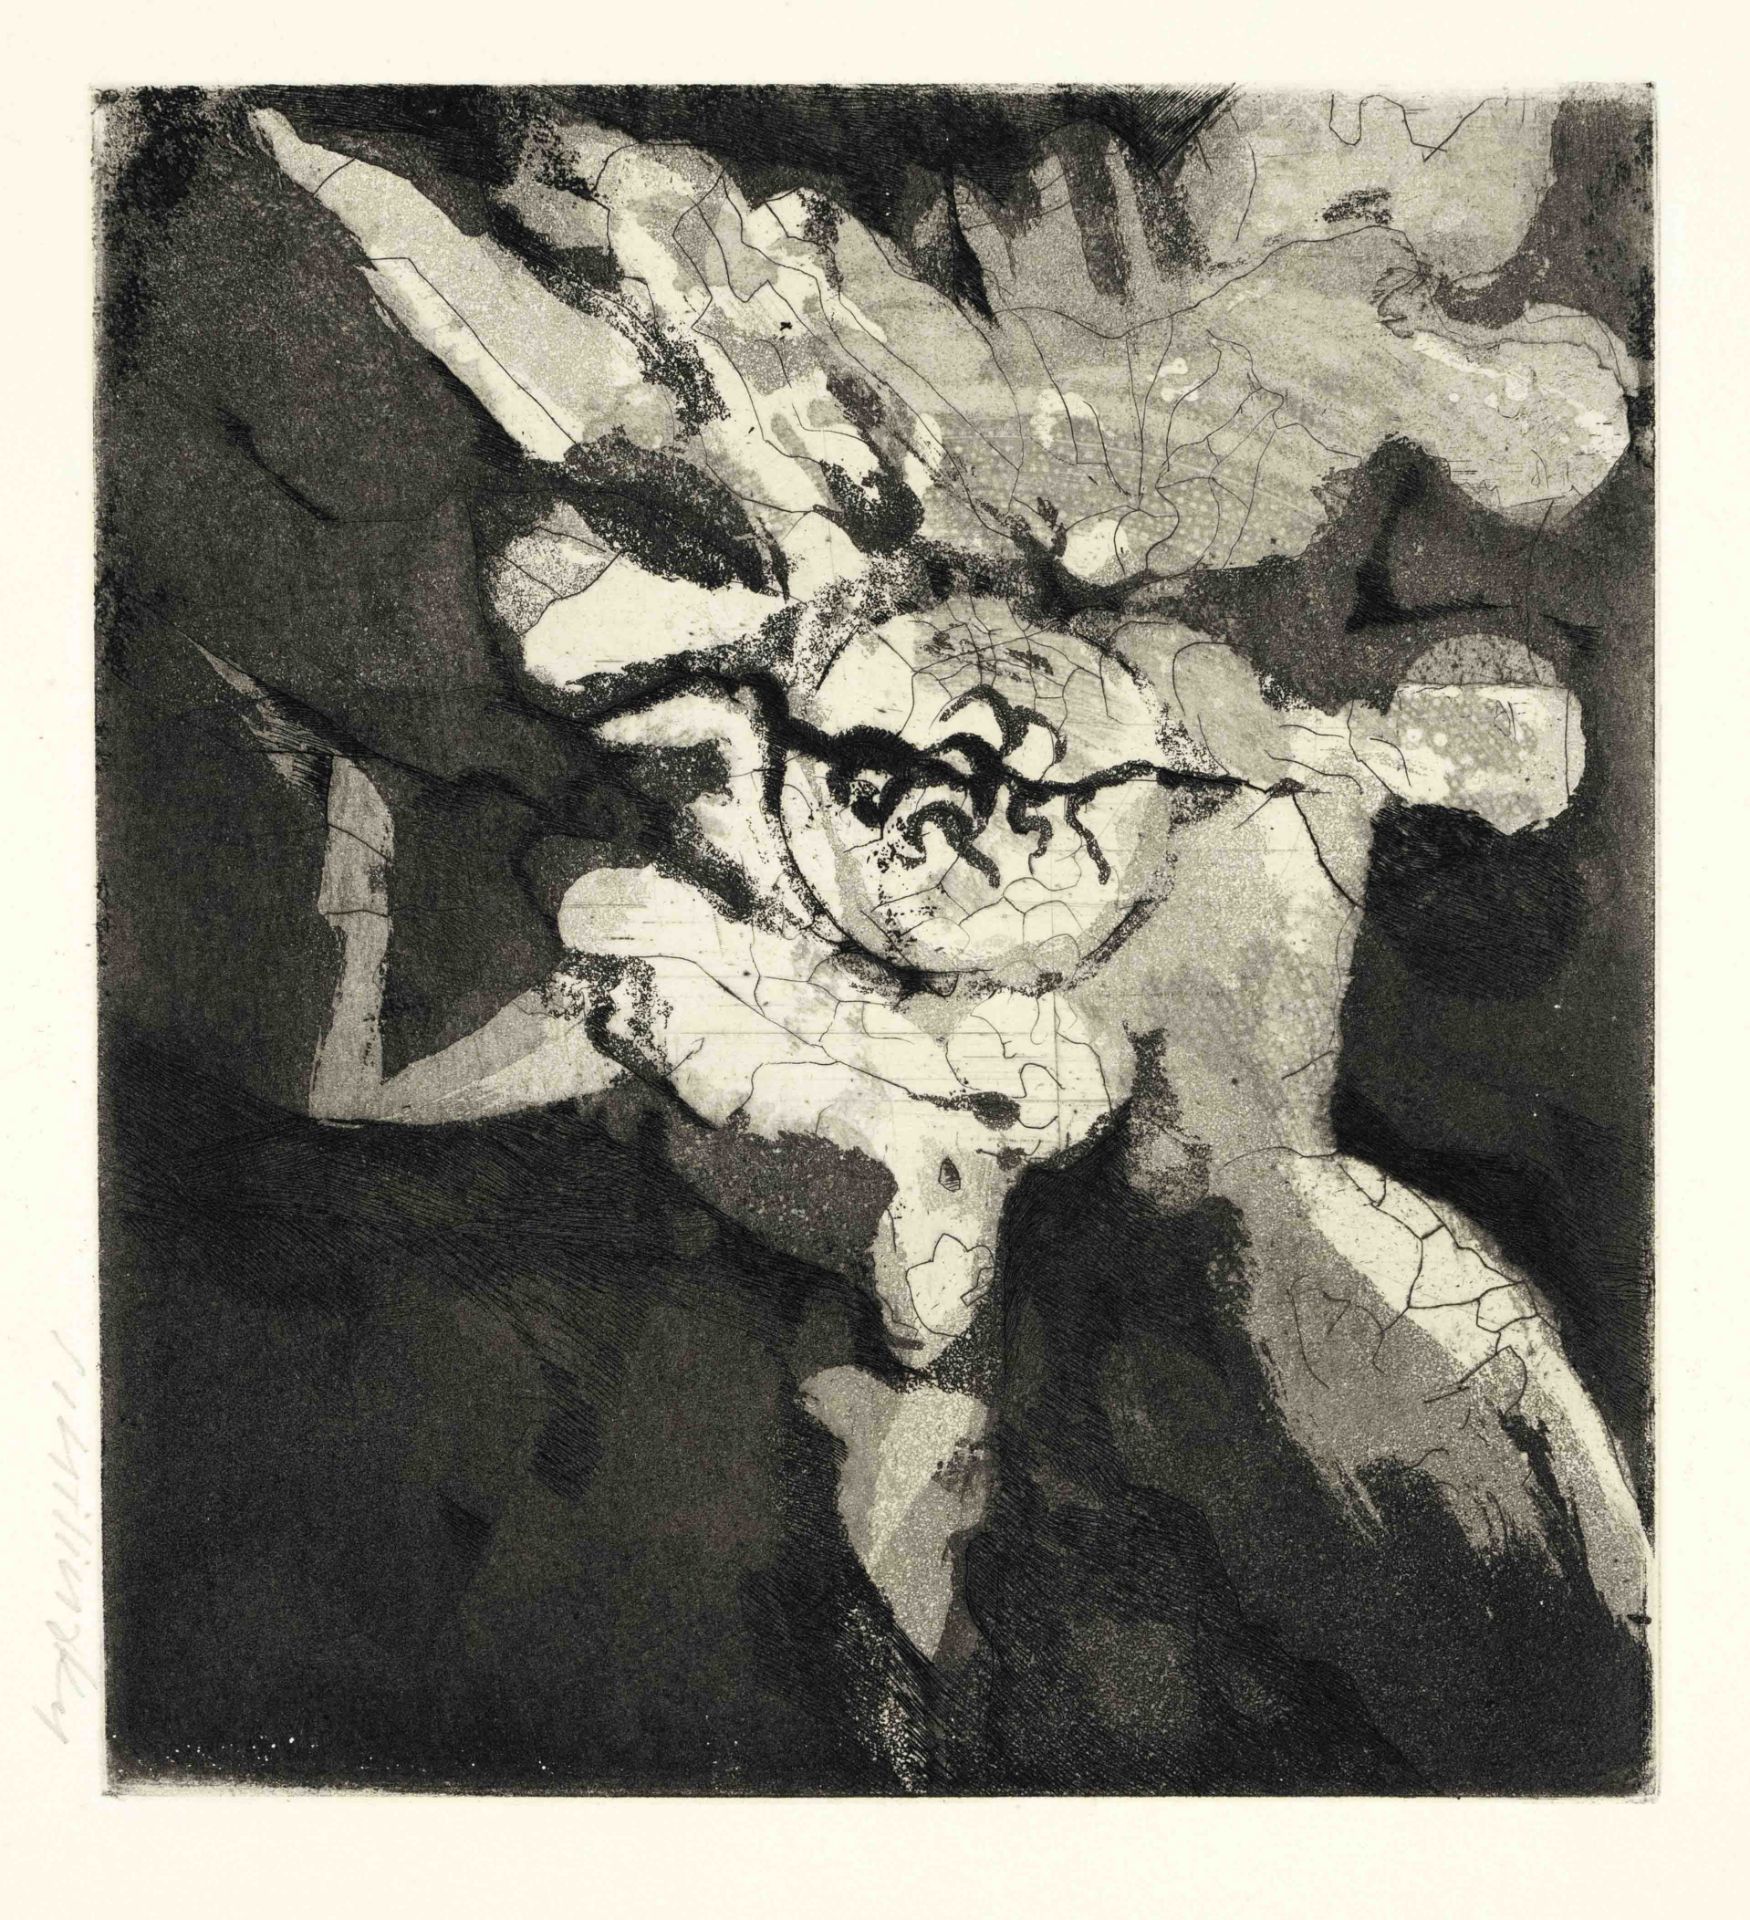 Mixed lot of 10 prints by different artists 2nd half 20th century: Oskar Koller (1925-2004), - Image 5 of 6